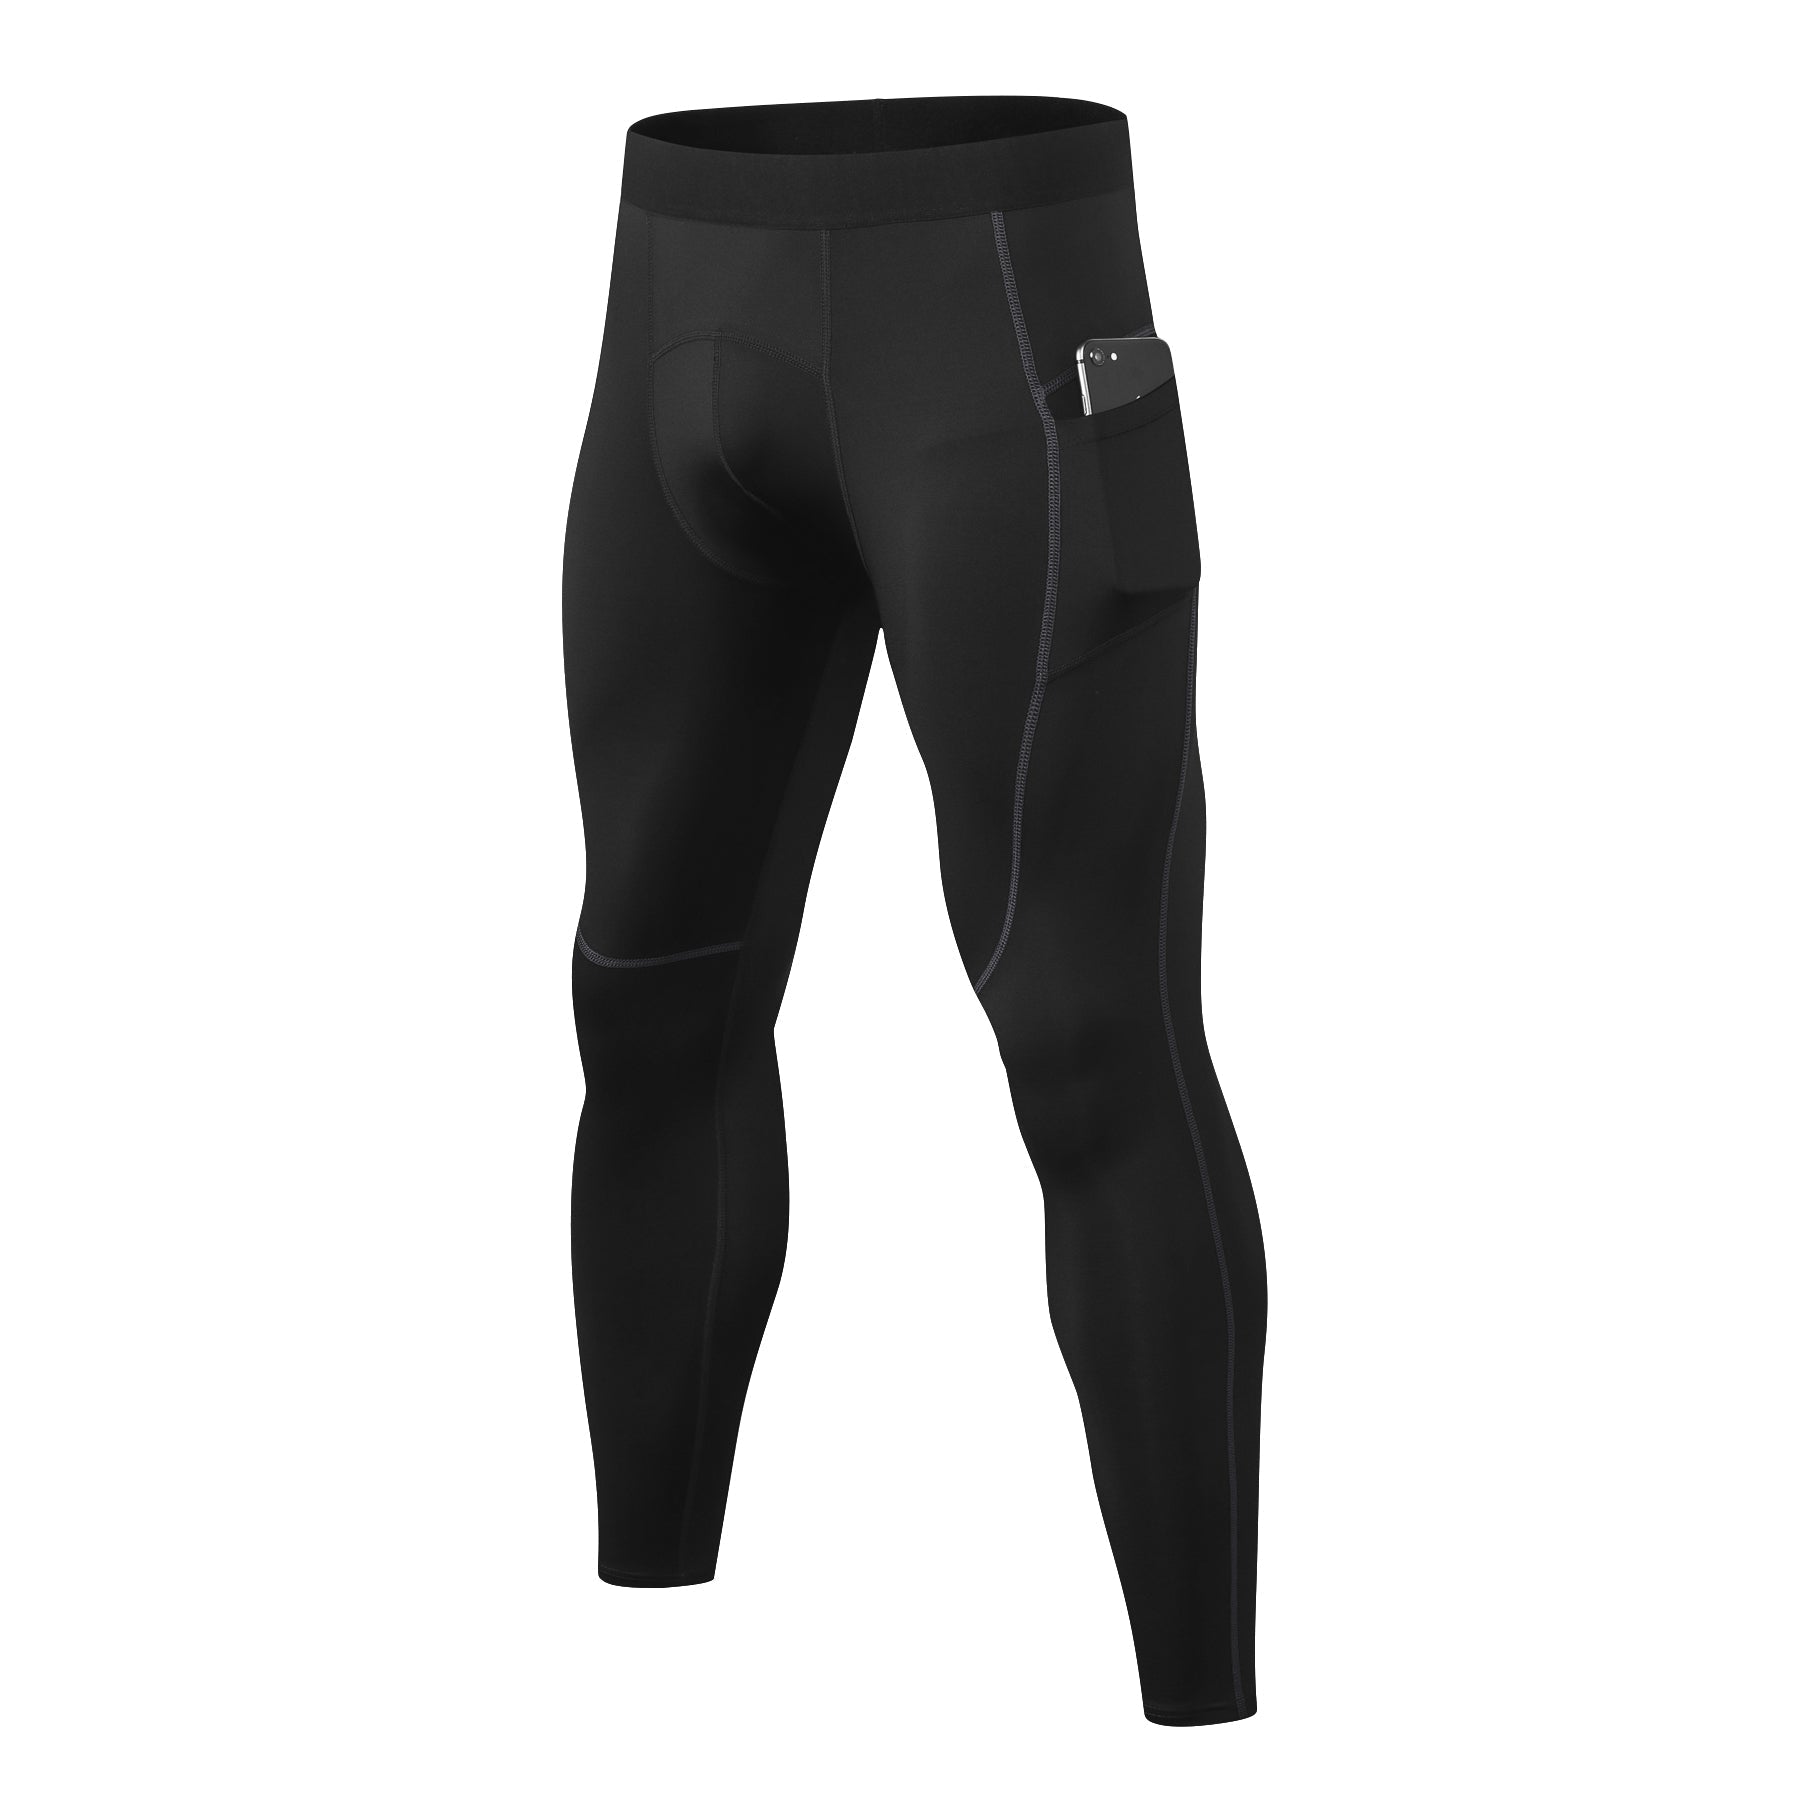 Mens Compression Pants with Pocket Cool Dry Baselayer Workout Running Gym Leggings Sports Athletic Active Yoga Tights LANBAOSI